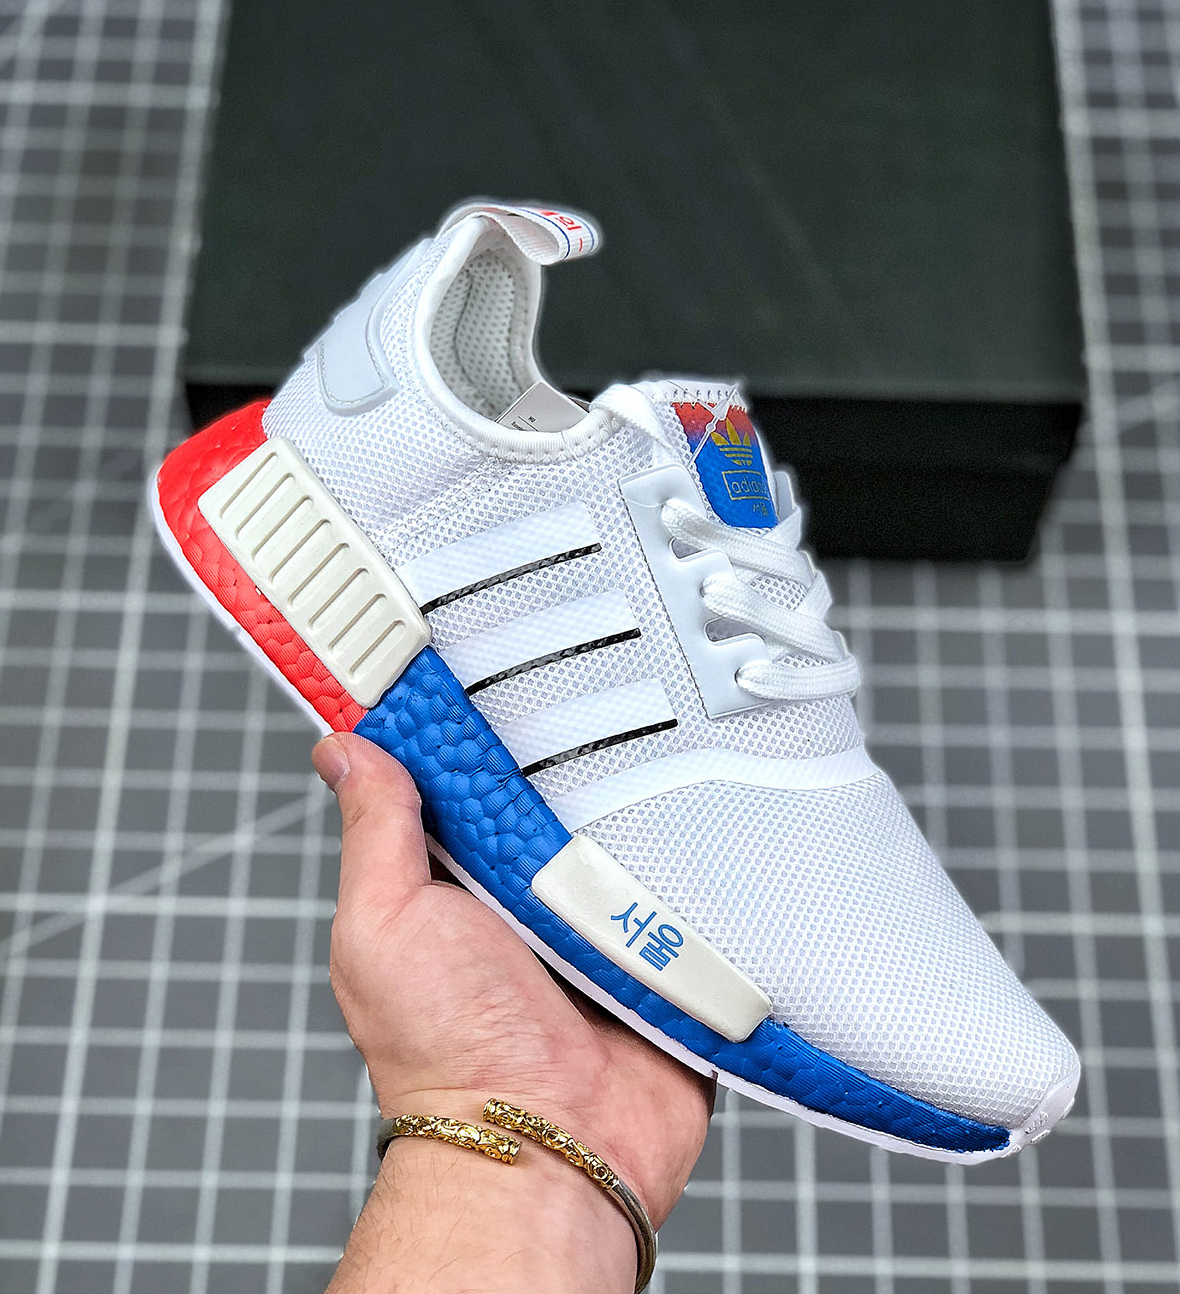 Adidas NMD R1 'Seoul' $69.99 Free Shipping - Sneaker Steal